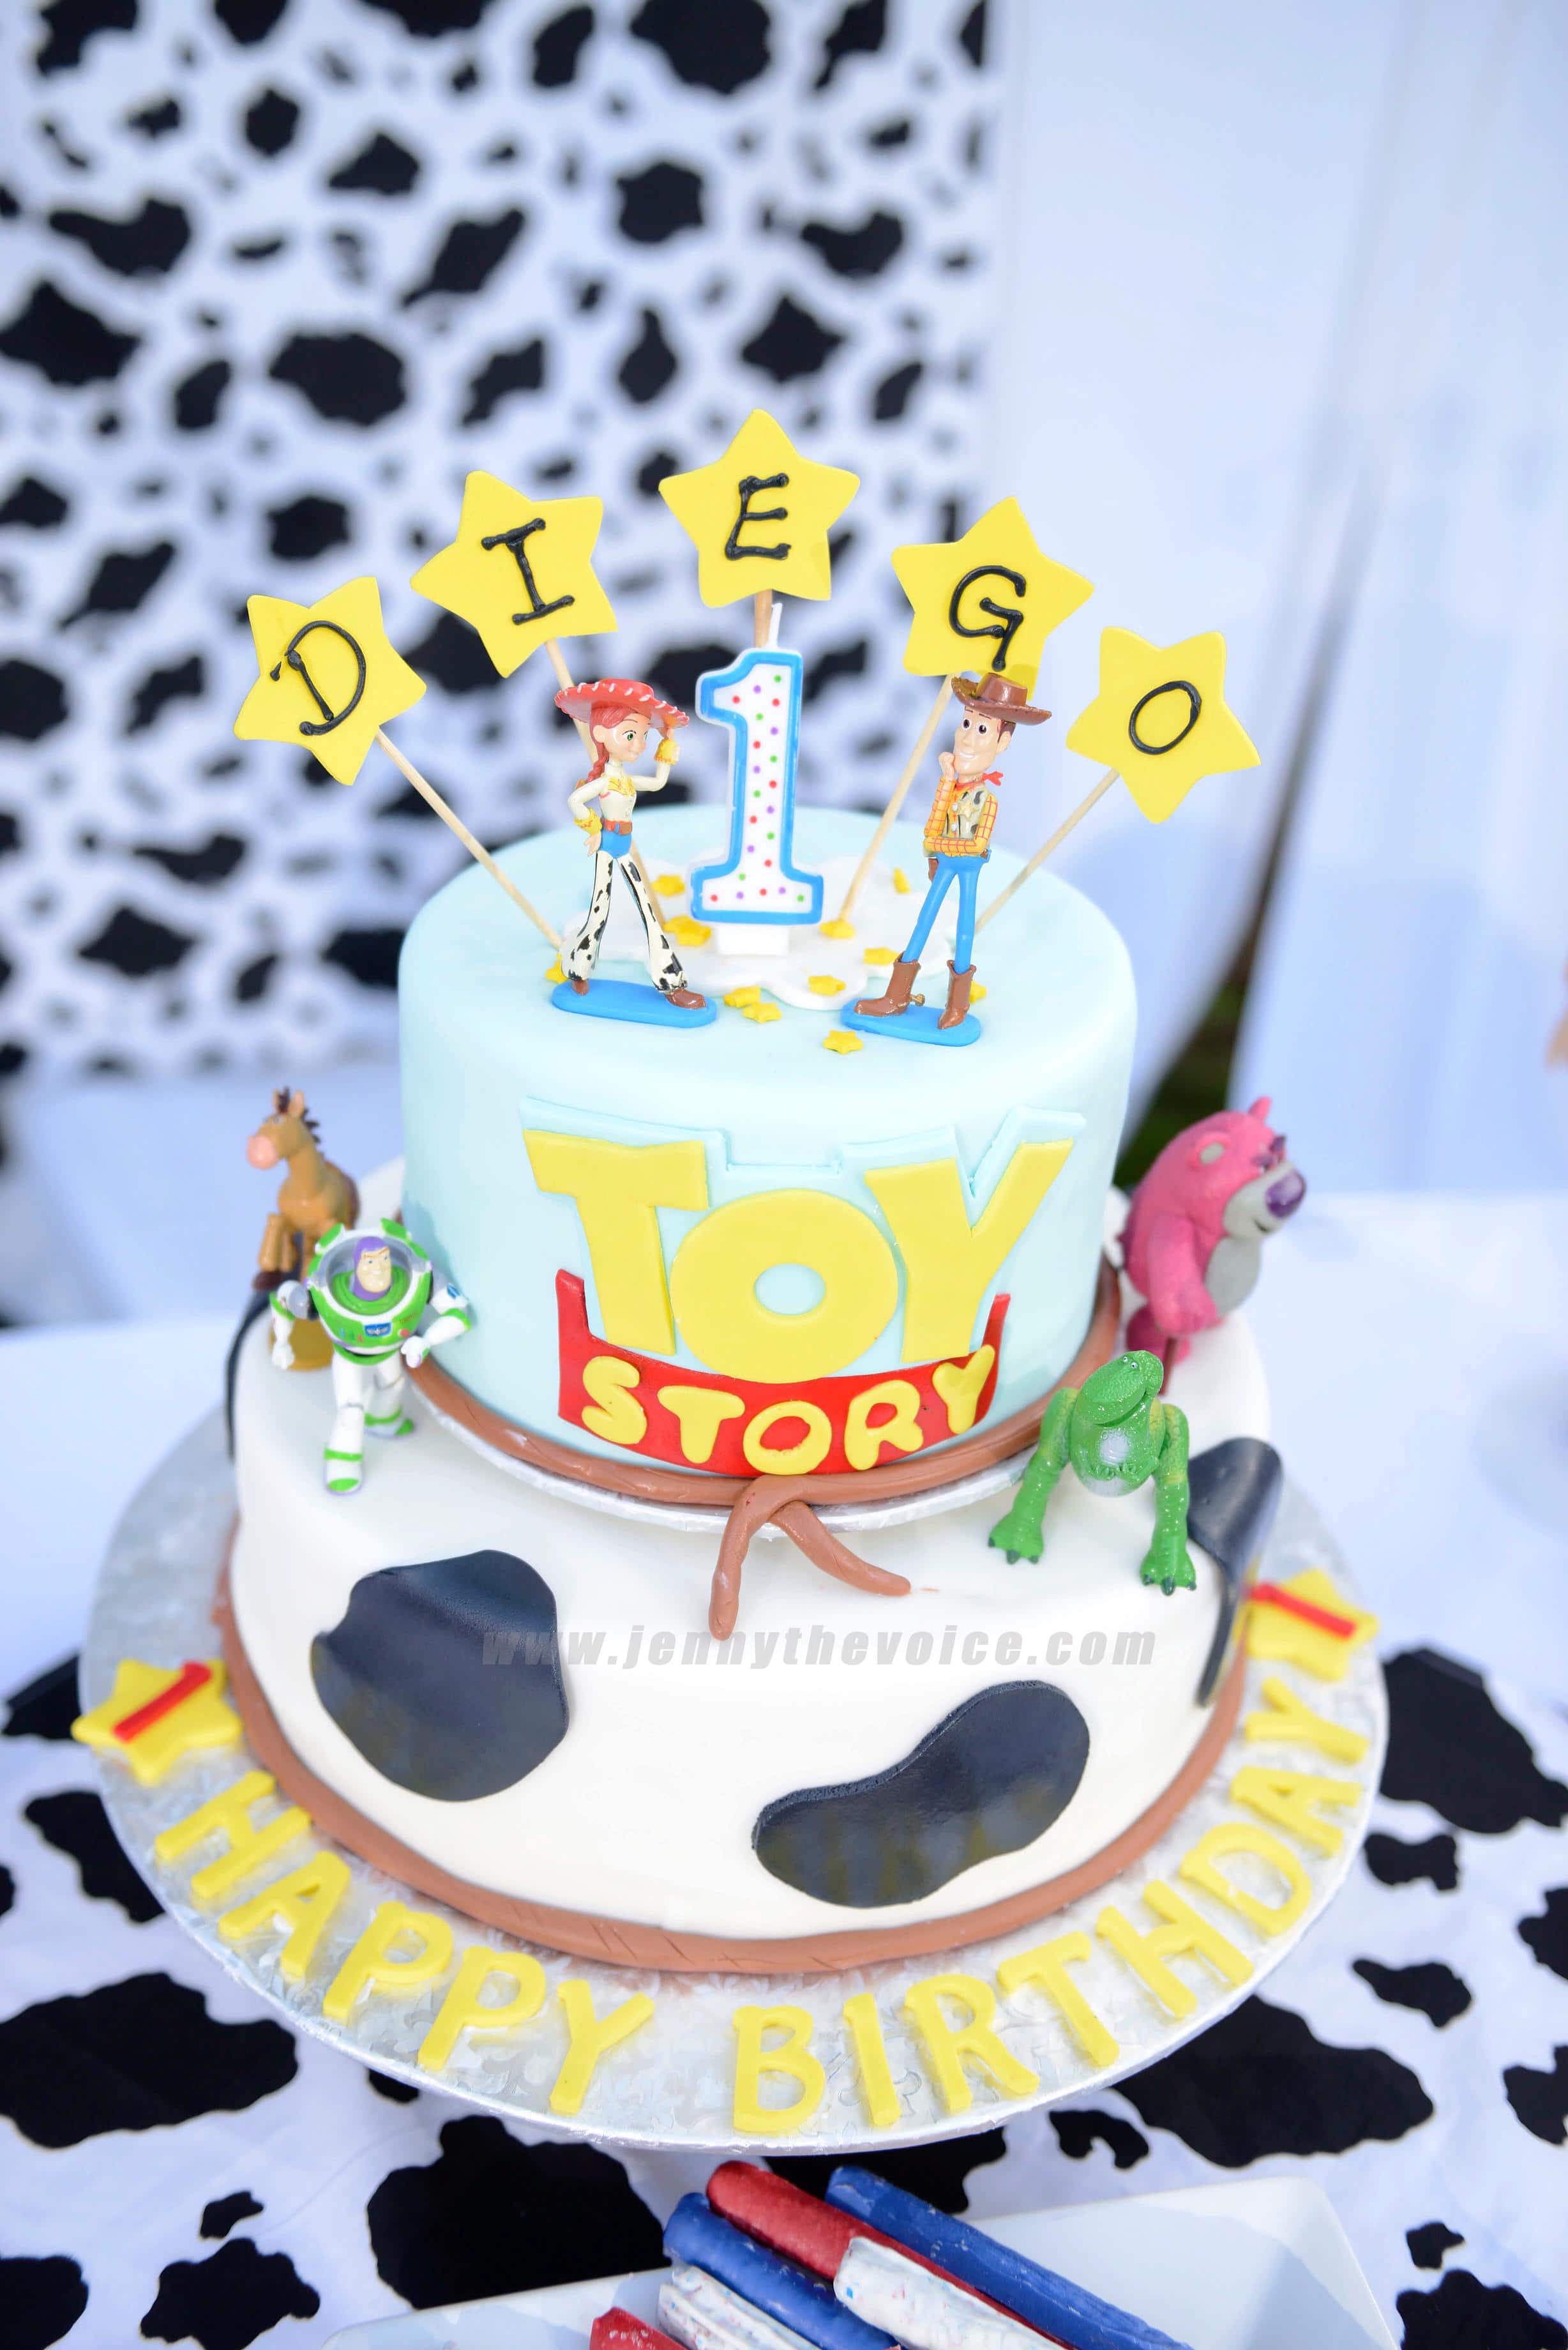 Toy-Story-birthday-party-ideas-toy-story-land